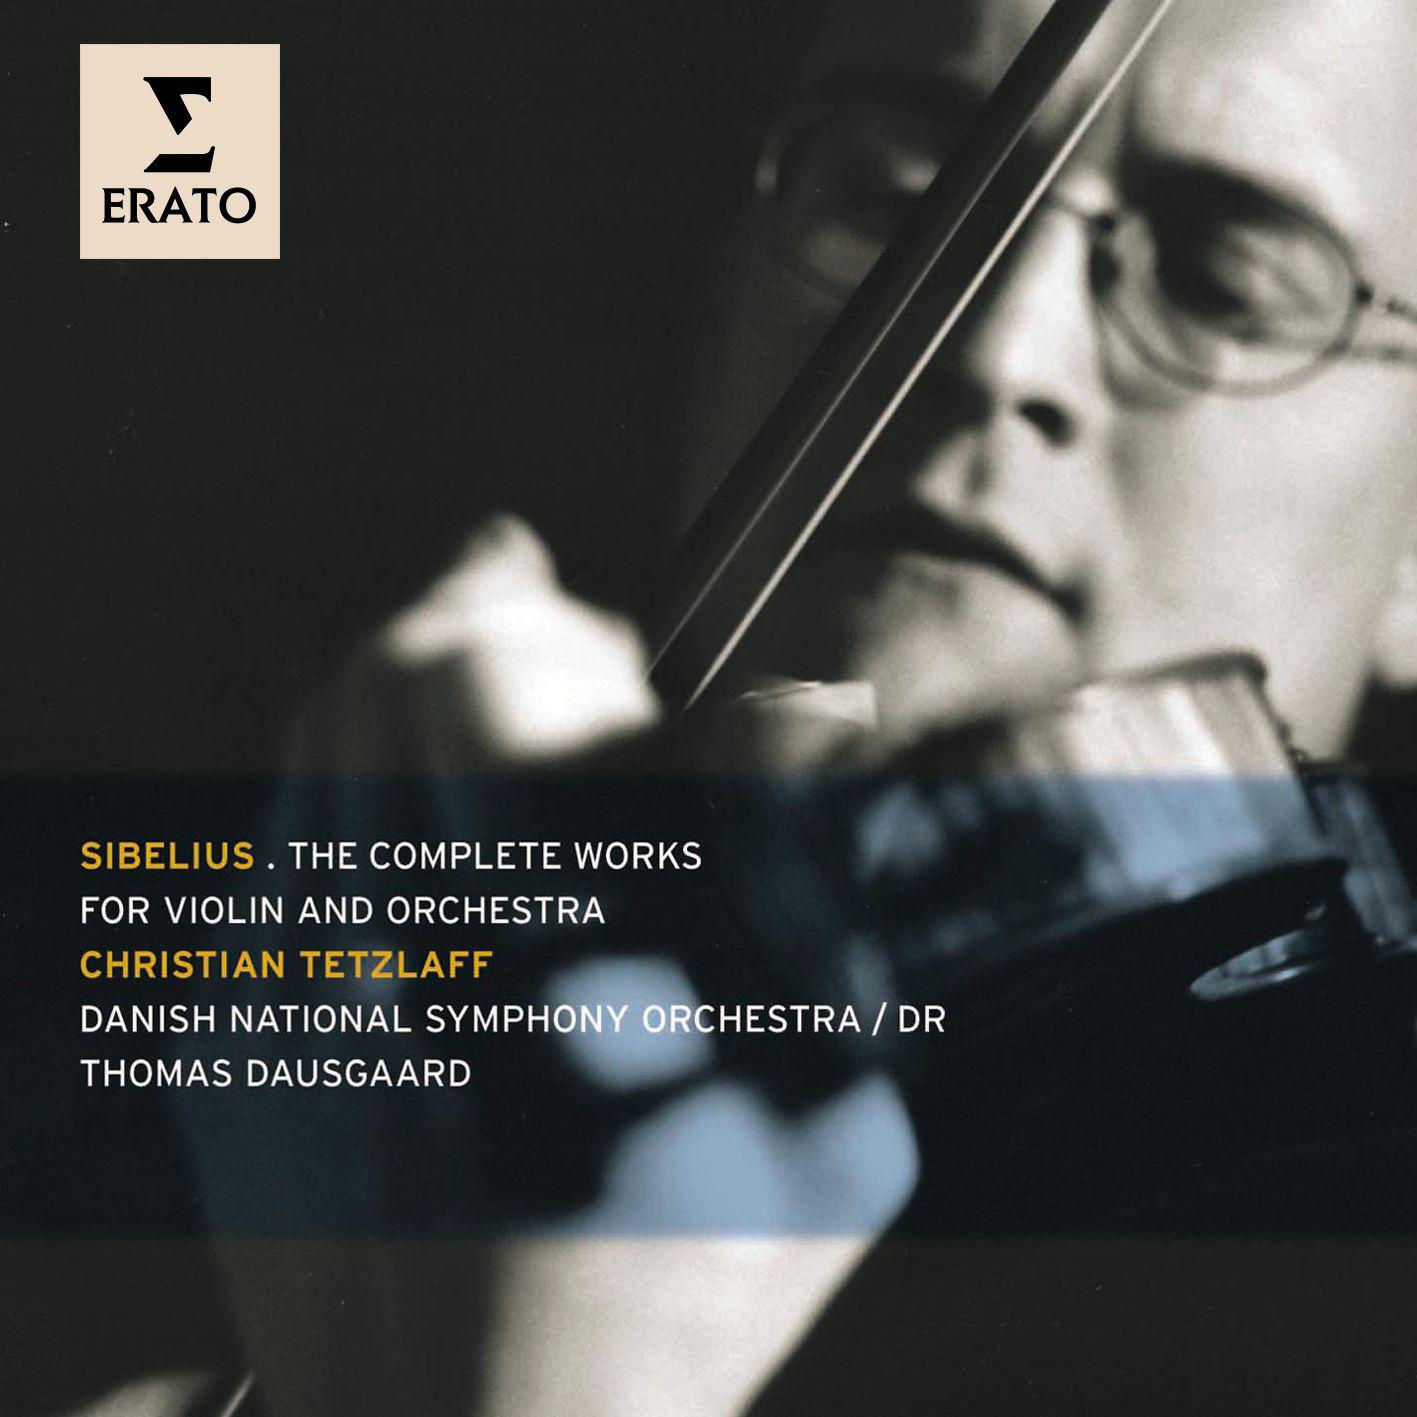 Suite for Violin and Strings, Op. 117: In the Summer - Vivace